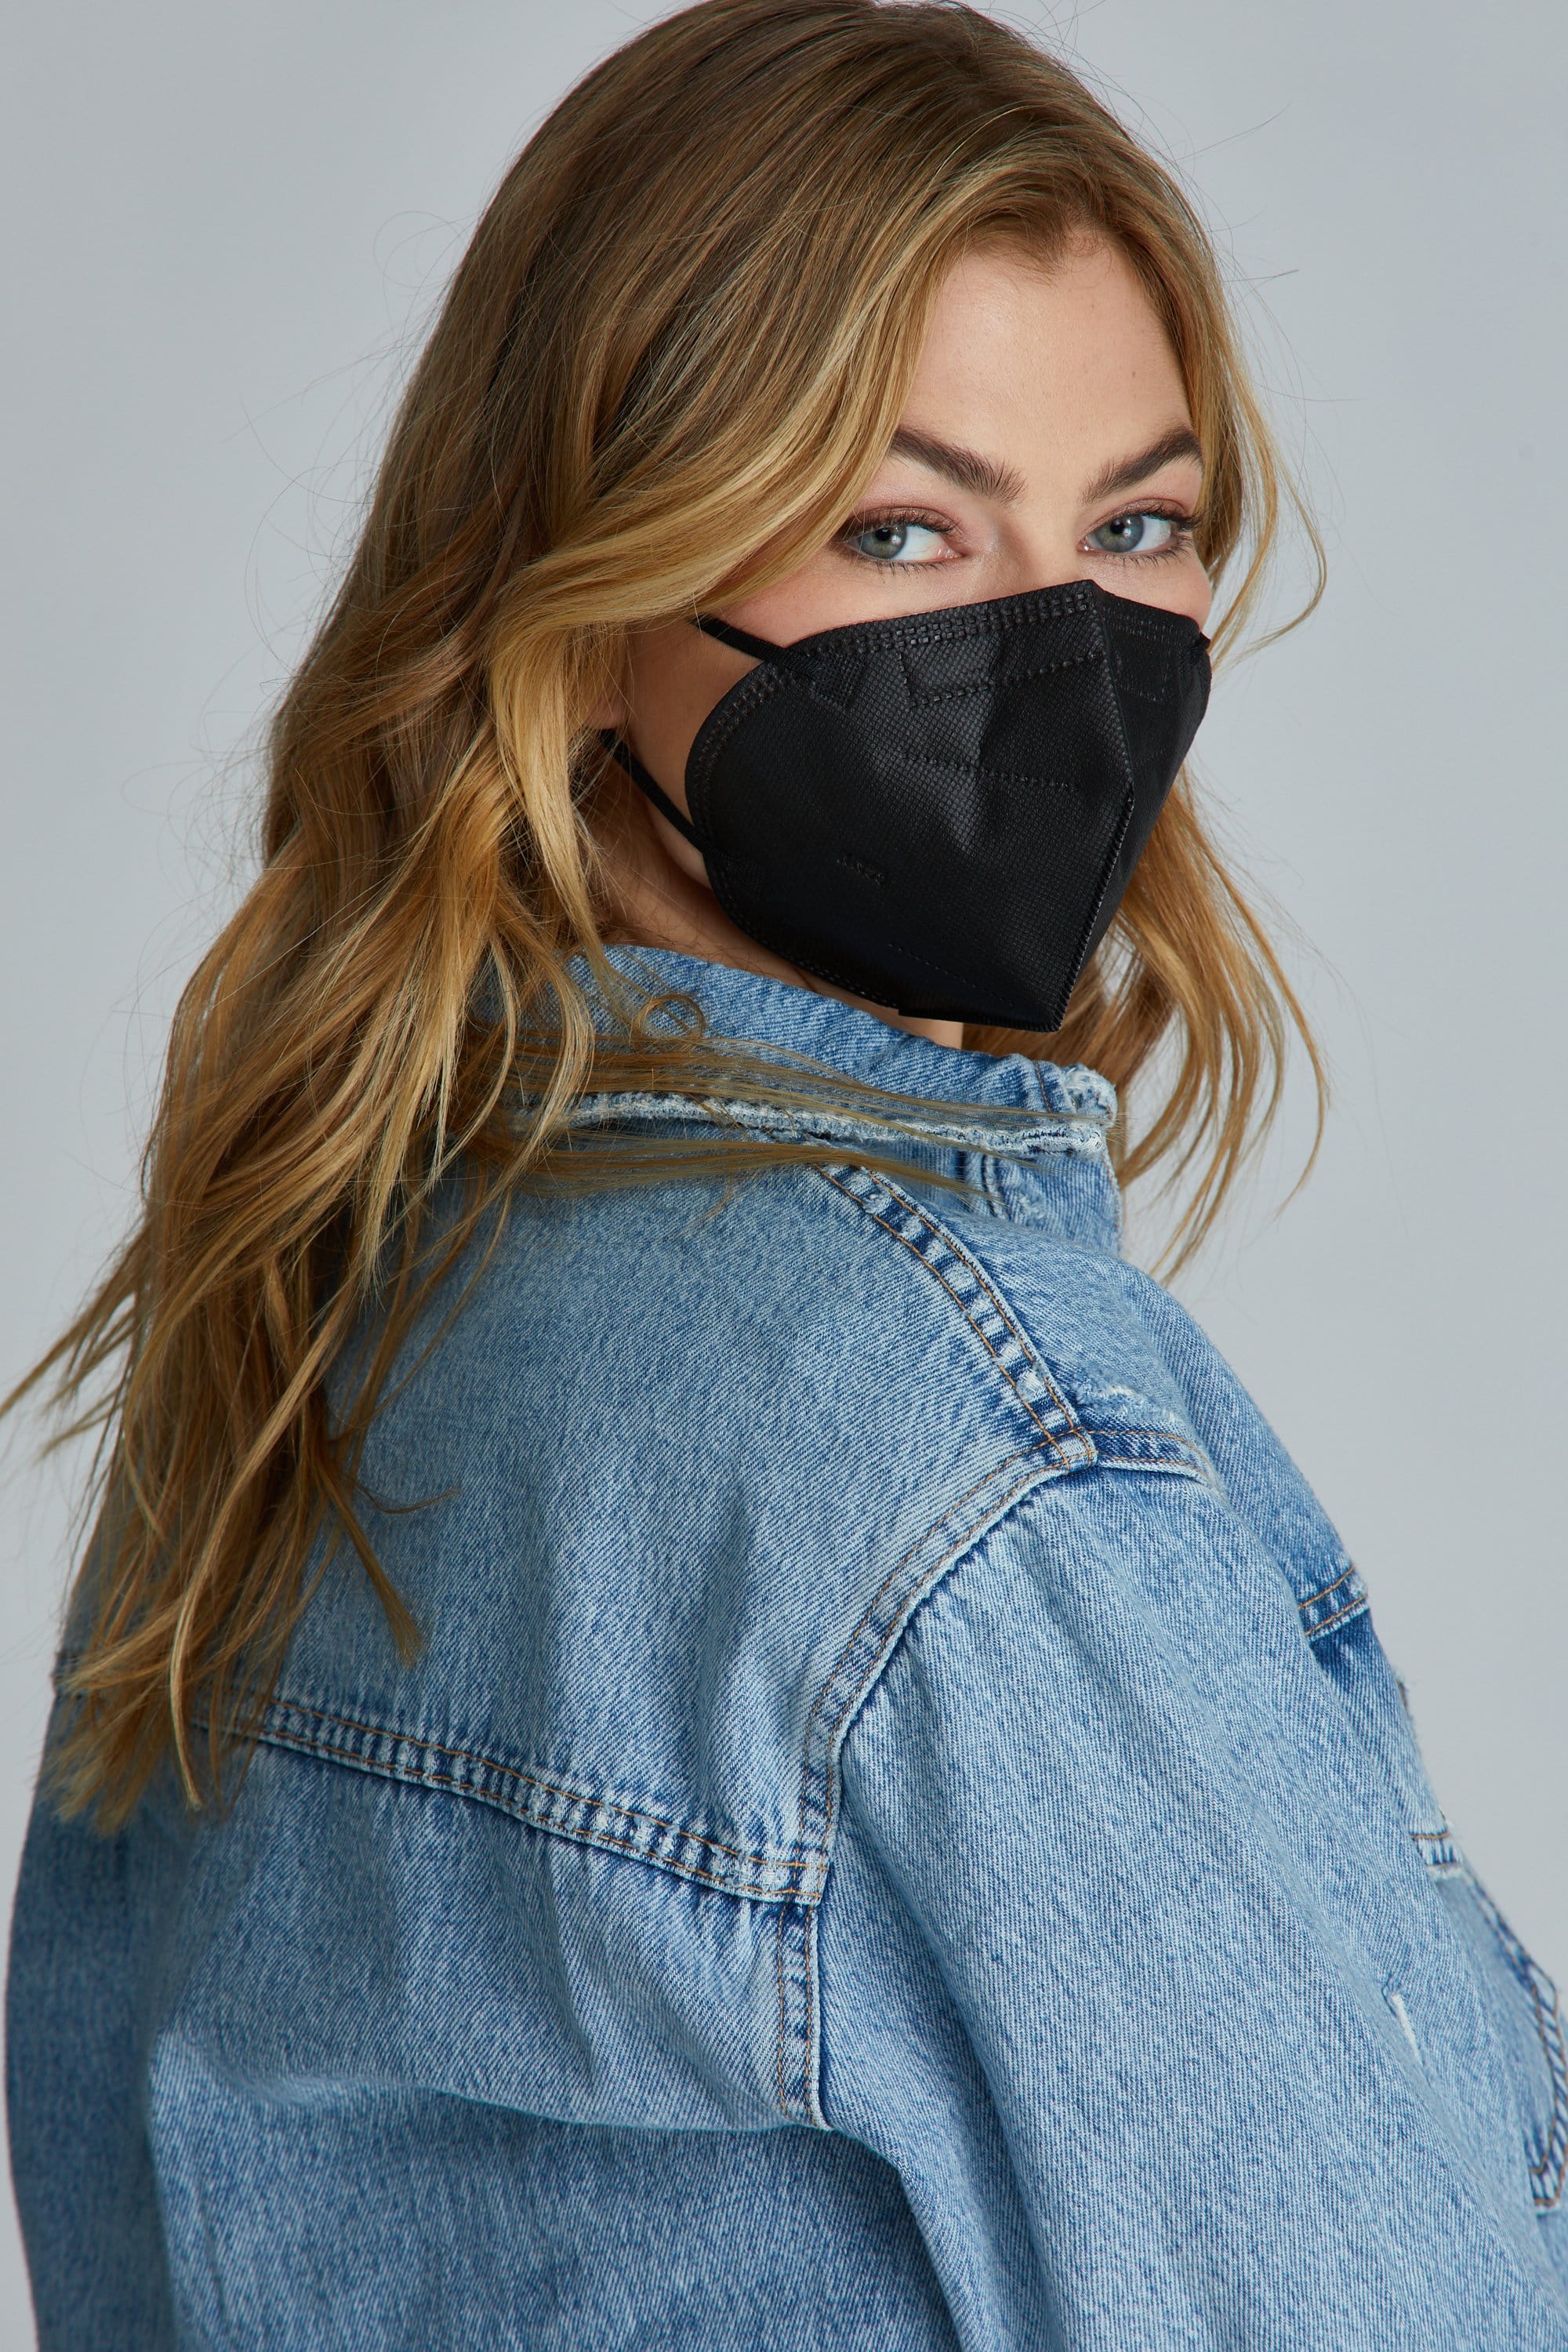 Woman wearing Black KN95 face mask, with high quality breathable fabric.  